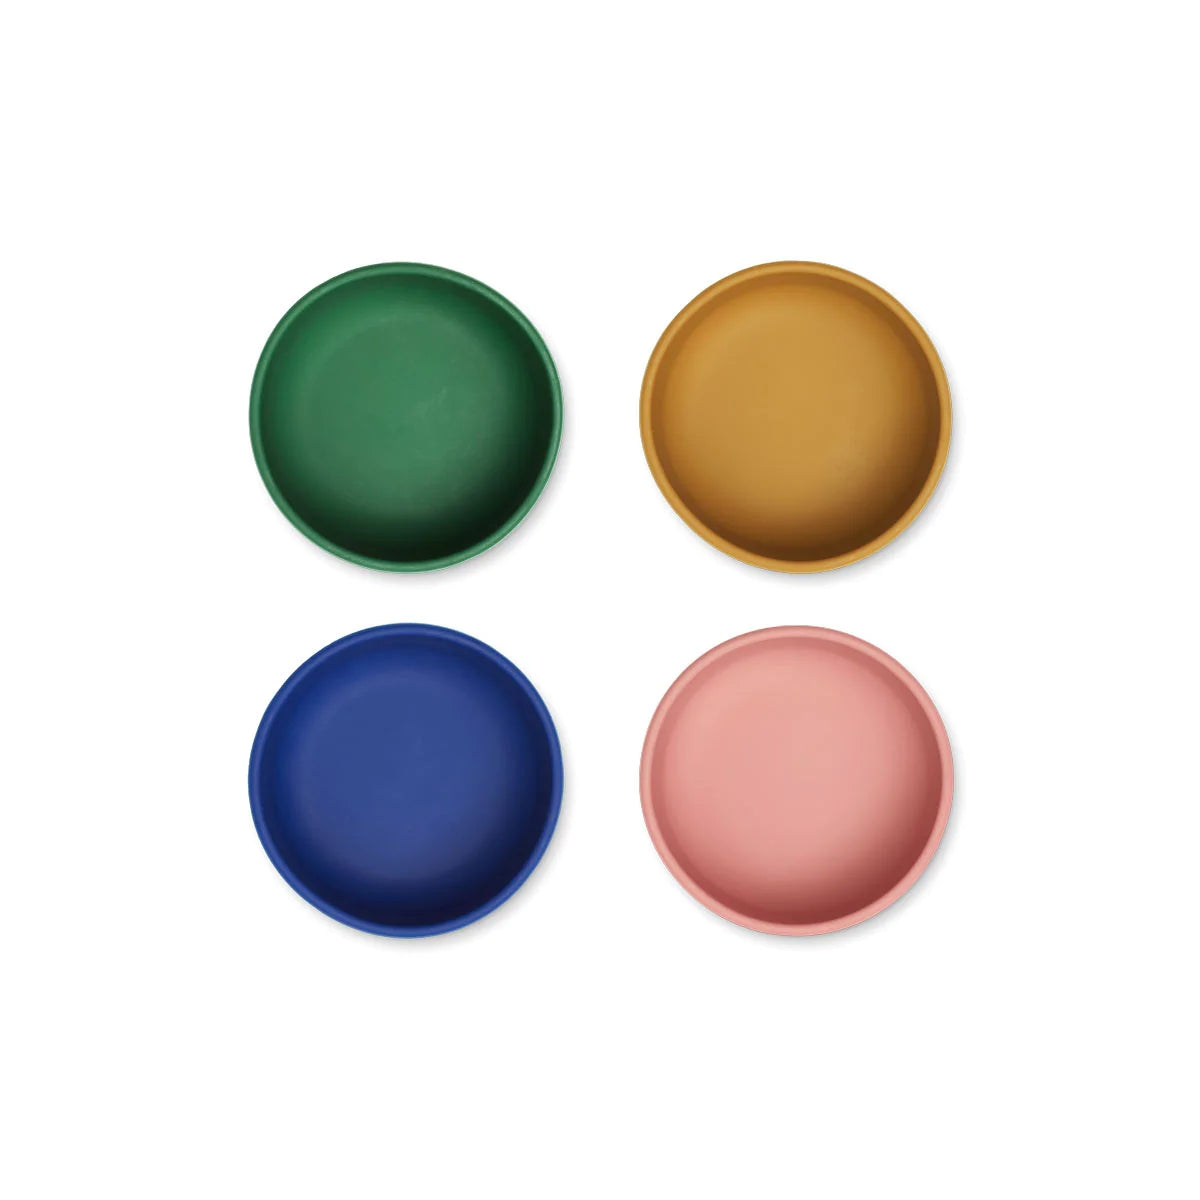 Multicolor Silicone Bowels (4 Pack)